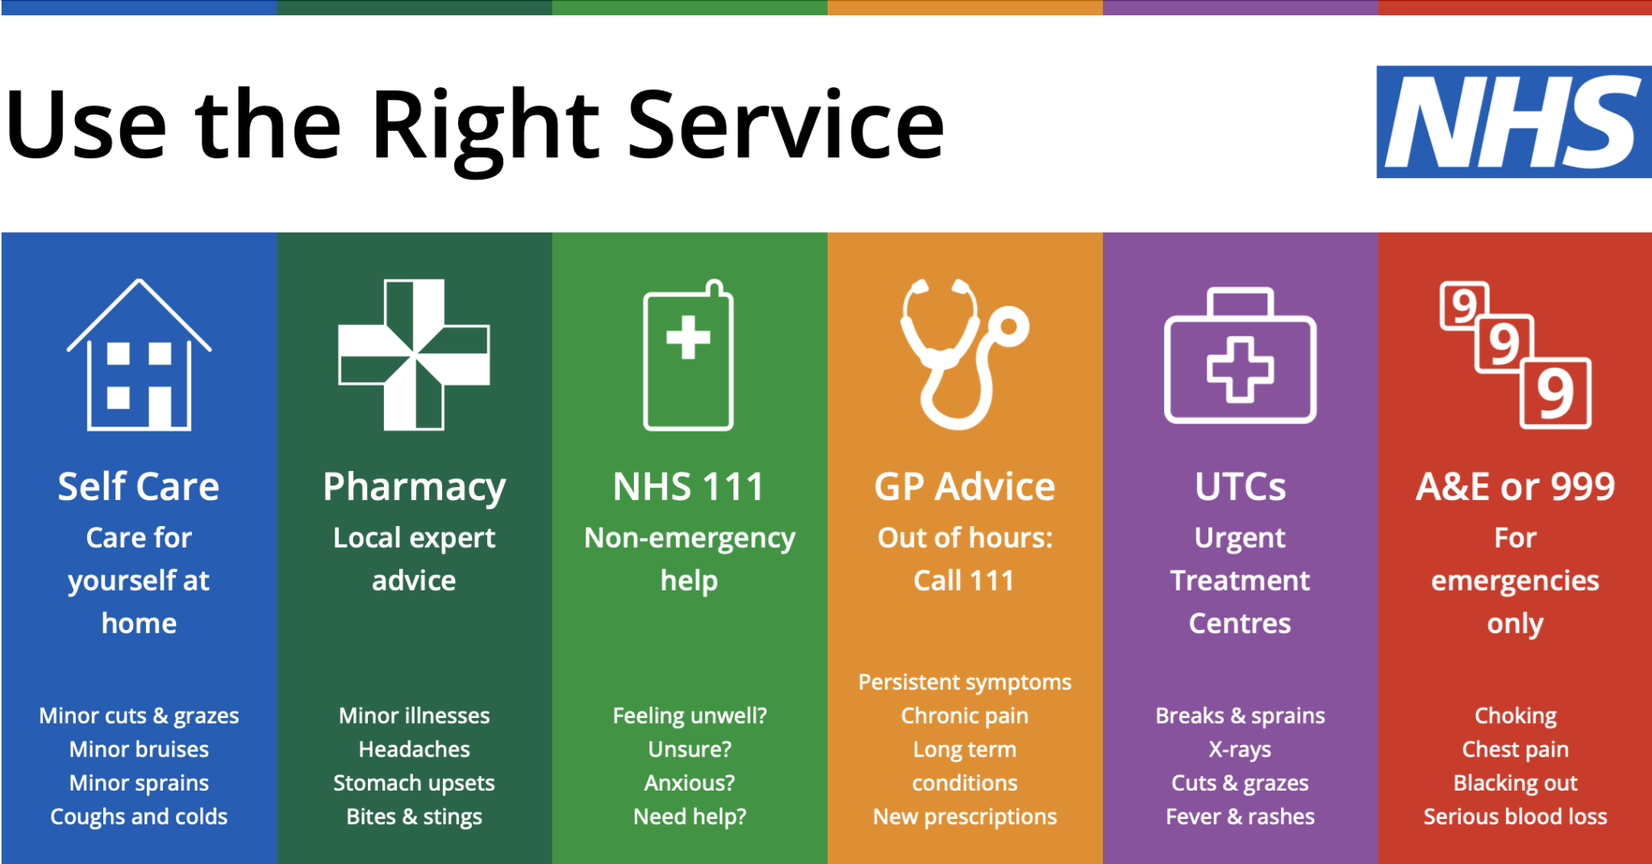 A graphic that says "NHS: Use the Right Service. Self Care - care for yourself at home: minor cuts and grazes, minor bruises, minor sprains, coughs and colds. Pharmacy - local expert advice: minor illnesses, headaches, stomach upsets, bites & stings. NHS 111 - non-emergency help: feeling unwell? unsure? anxious? need help? GP Advice (out of hours call 111): persistent symptoms, chronic pain, long term, conditions, new prescriptions. UTCs - urgent treatment centres: breaks and sprains, x-rays, cuts and grazes, fever and rashes. A&E or 999 - for emergencies only: choking, chest pain, blacking out, serious blood loss